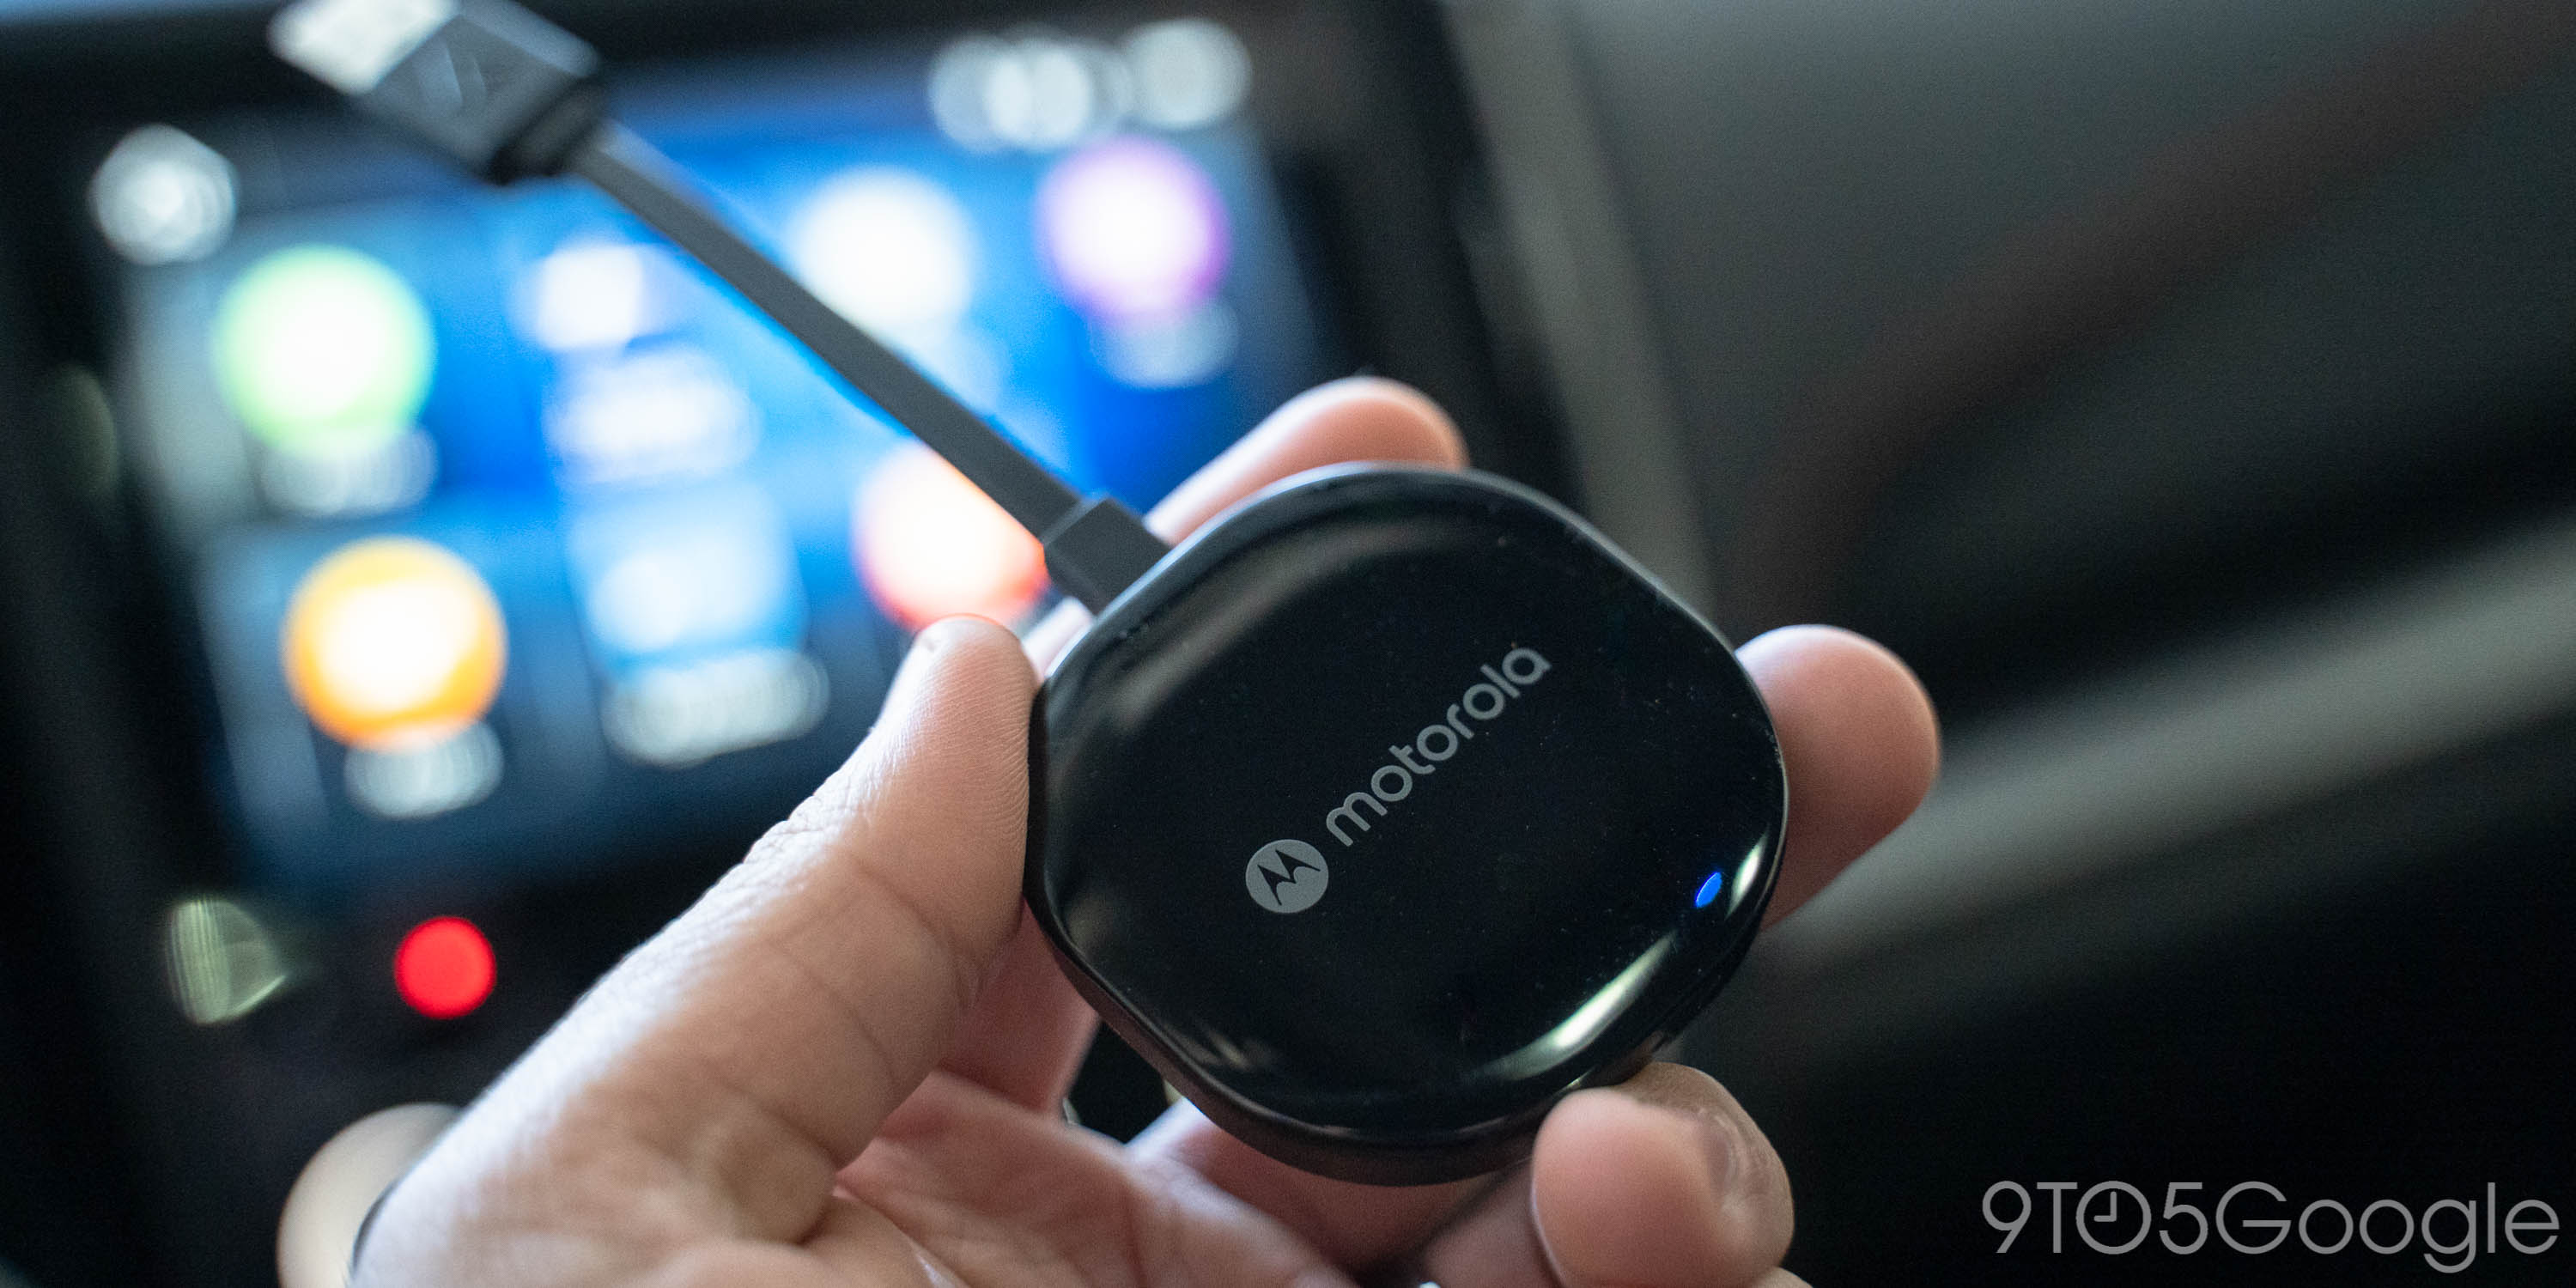 wireless android auto dongle